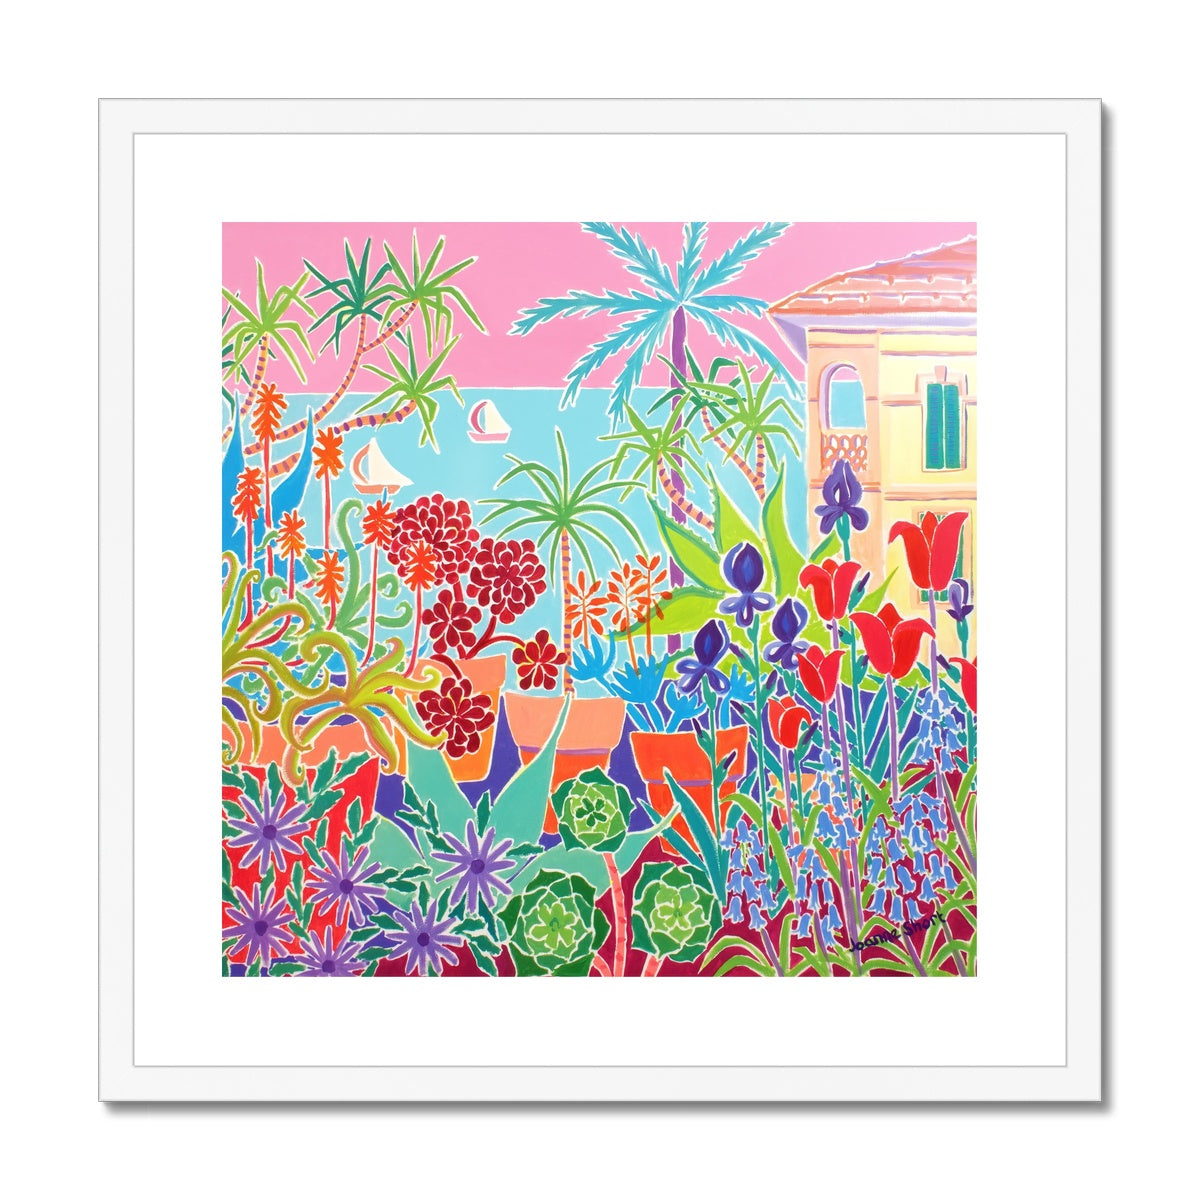 Joanne Short Framed Open Edition Cornish Fine Art Print. 'Patchwork Flowers and Pink Sky, Menton'. French Art Gallery